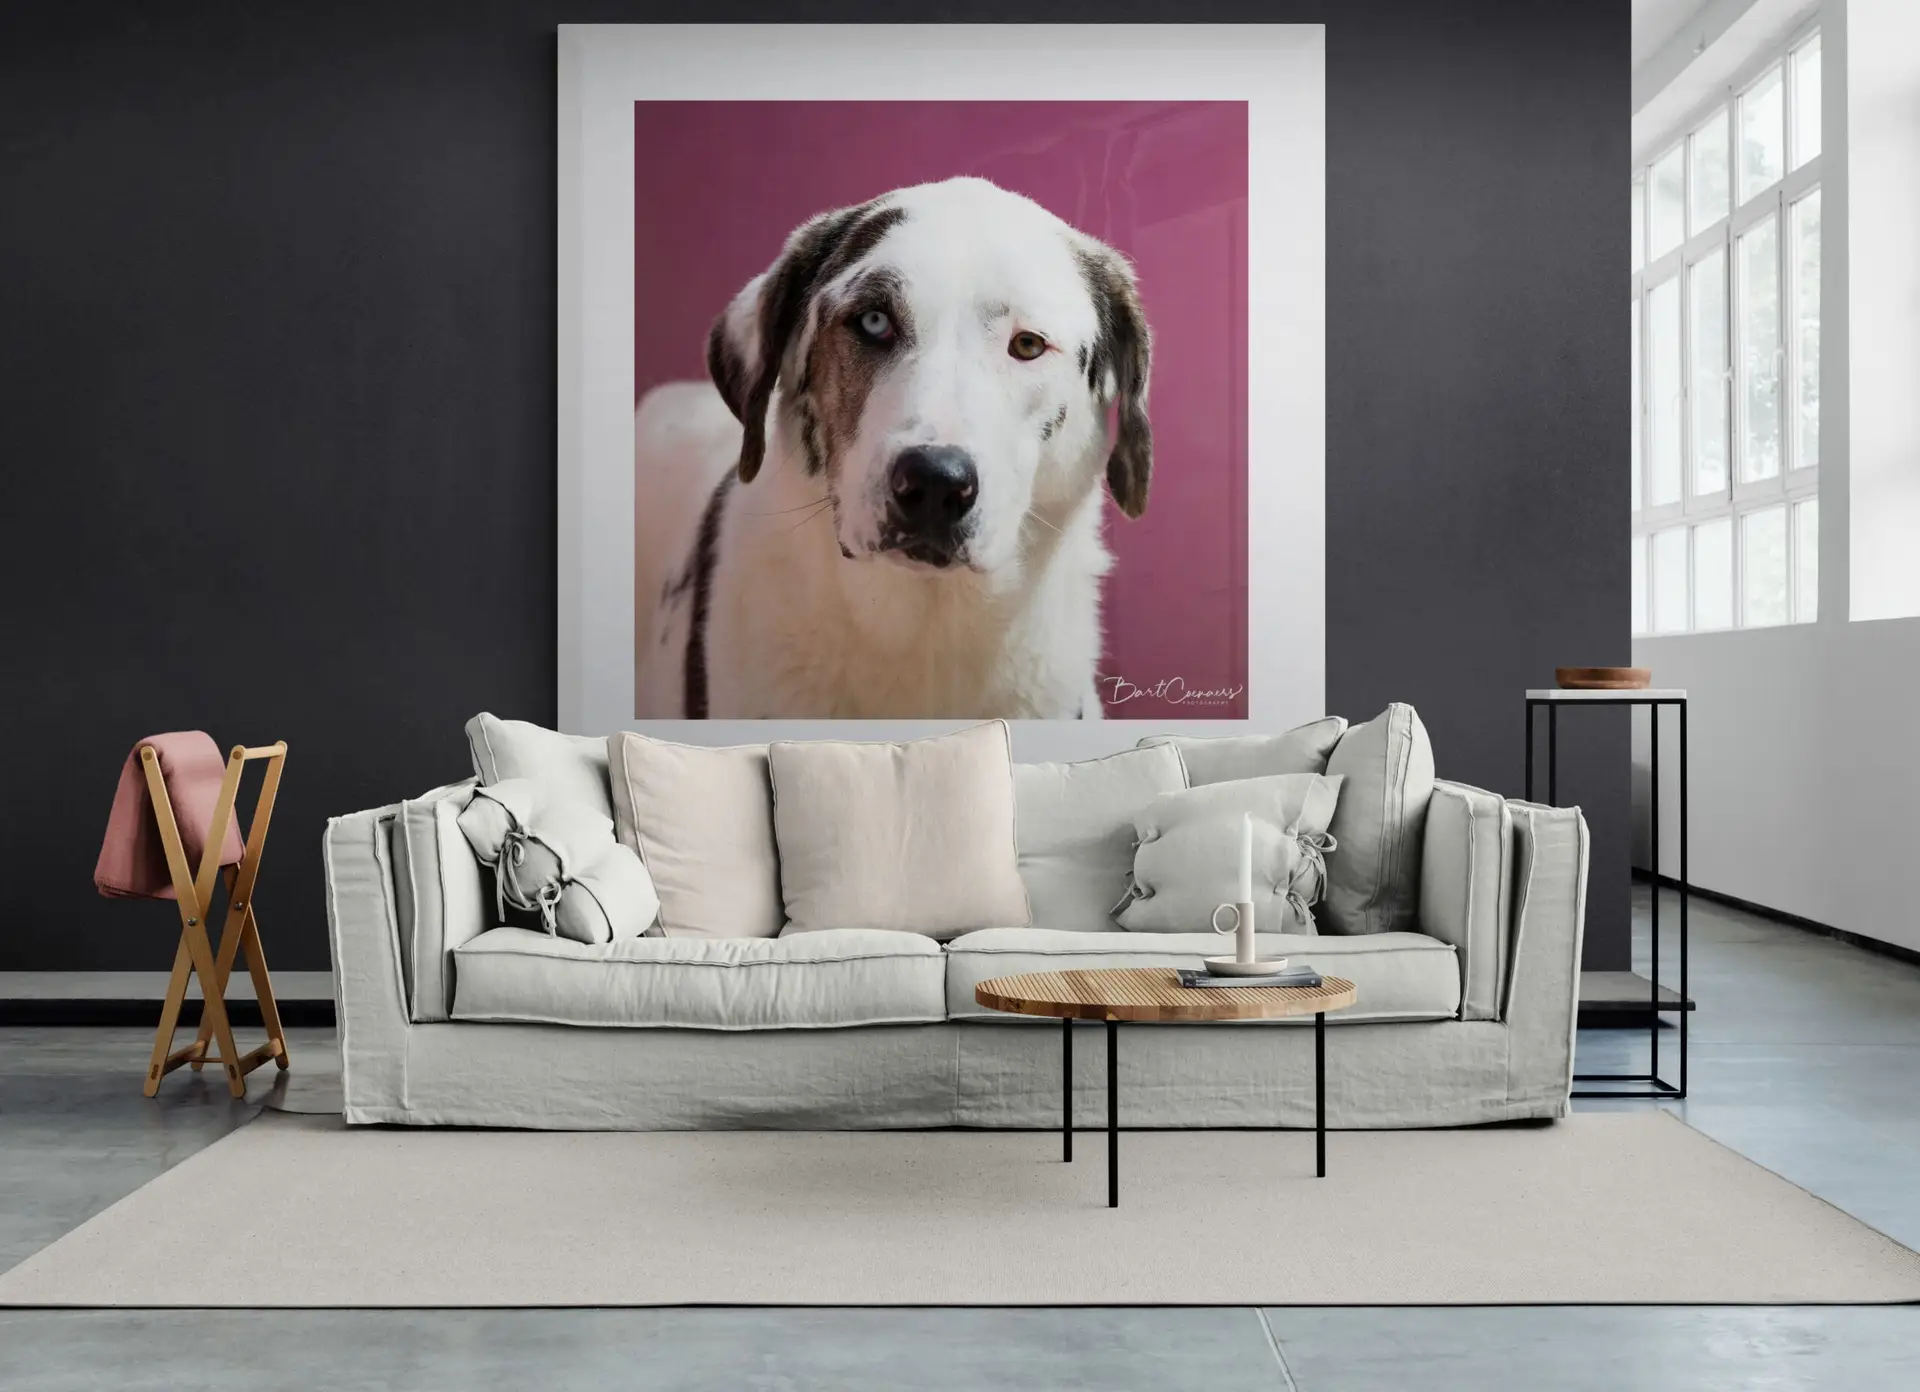 A LARGE photo of a SHIN-dog in a modern living room.